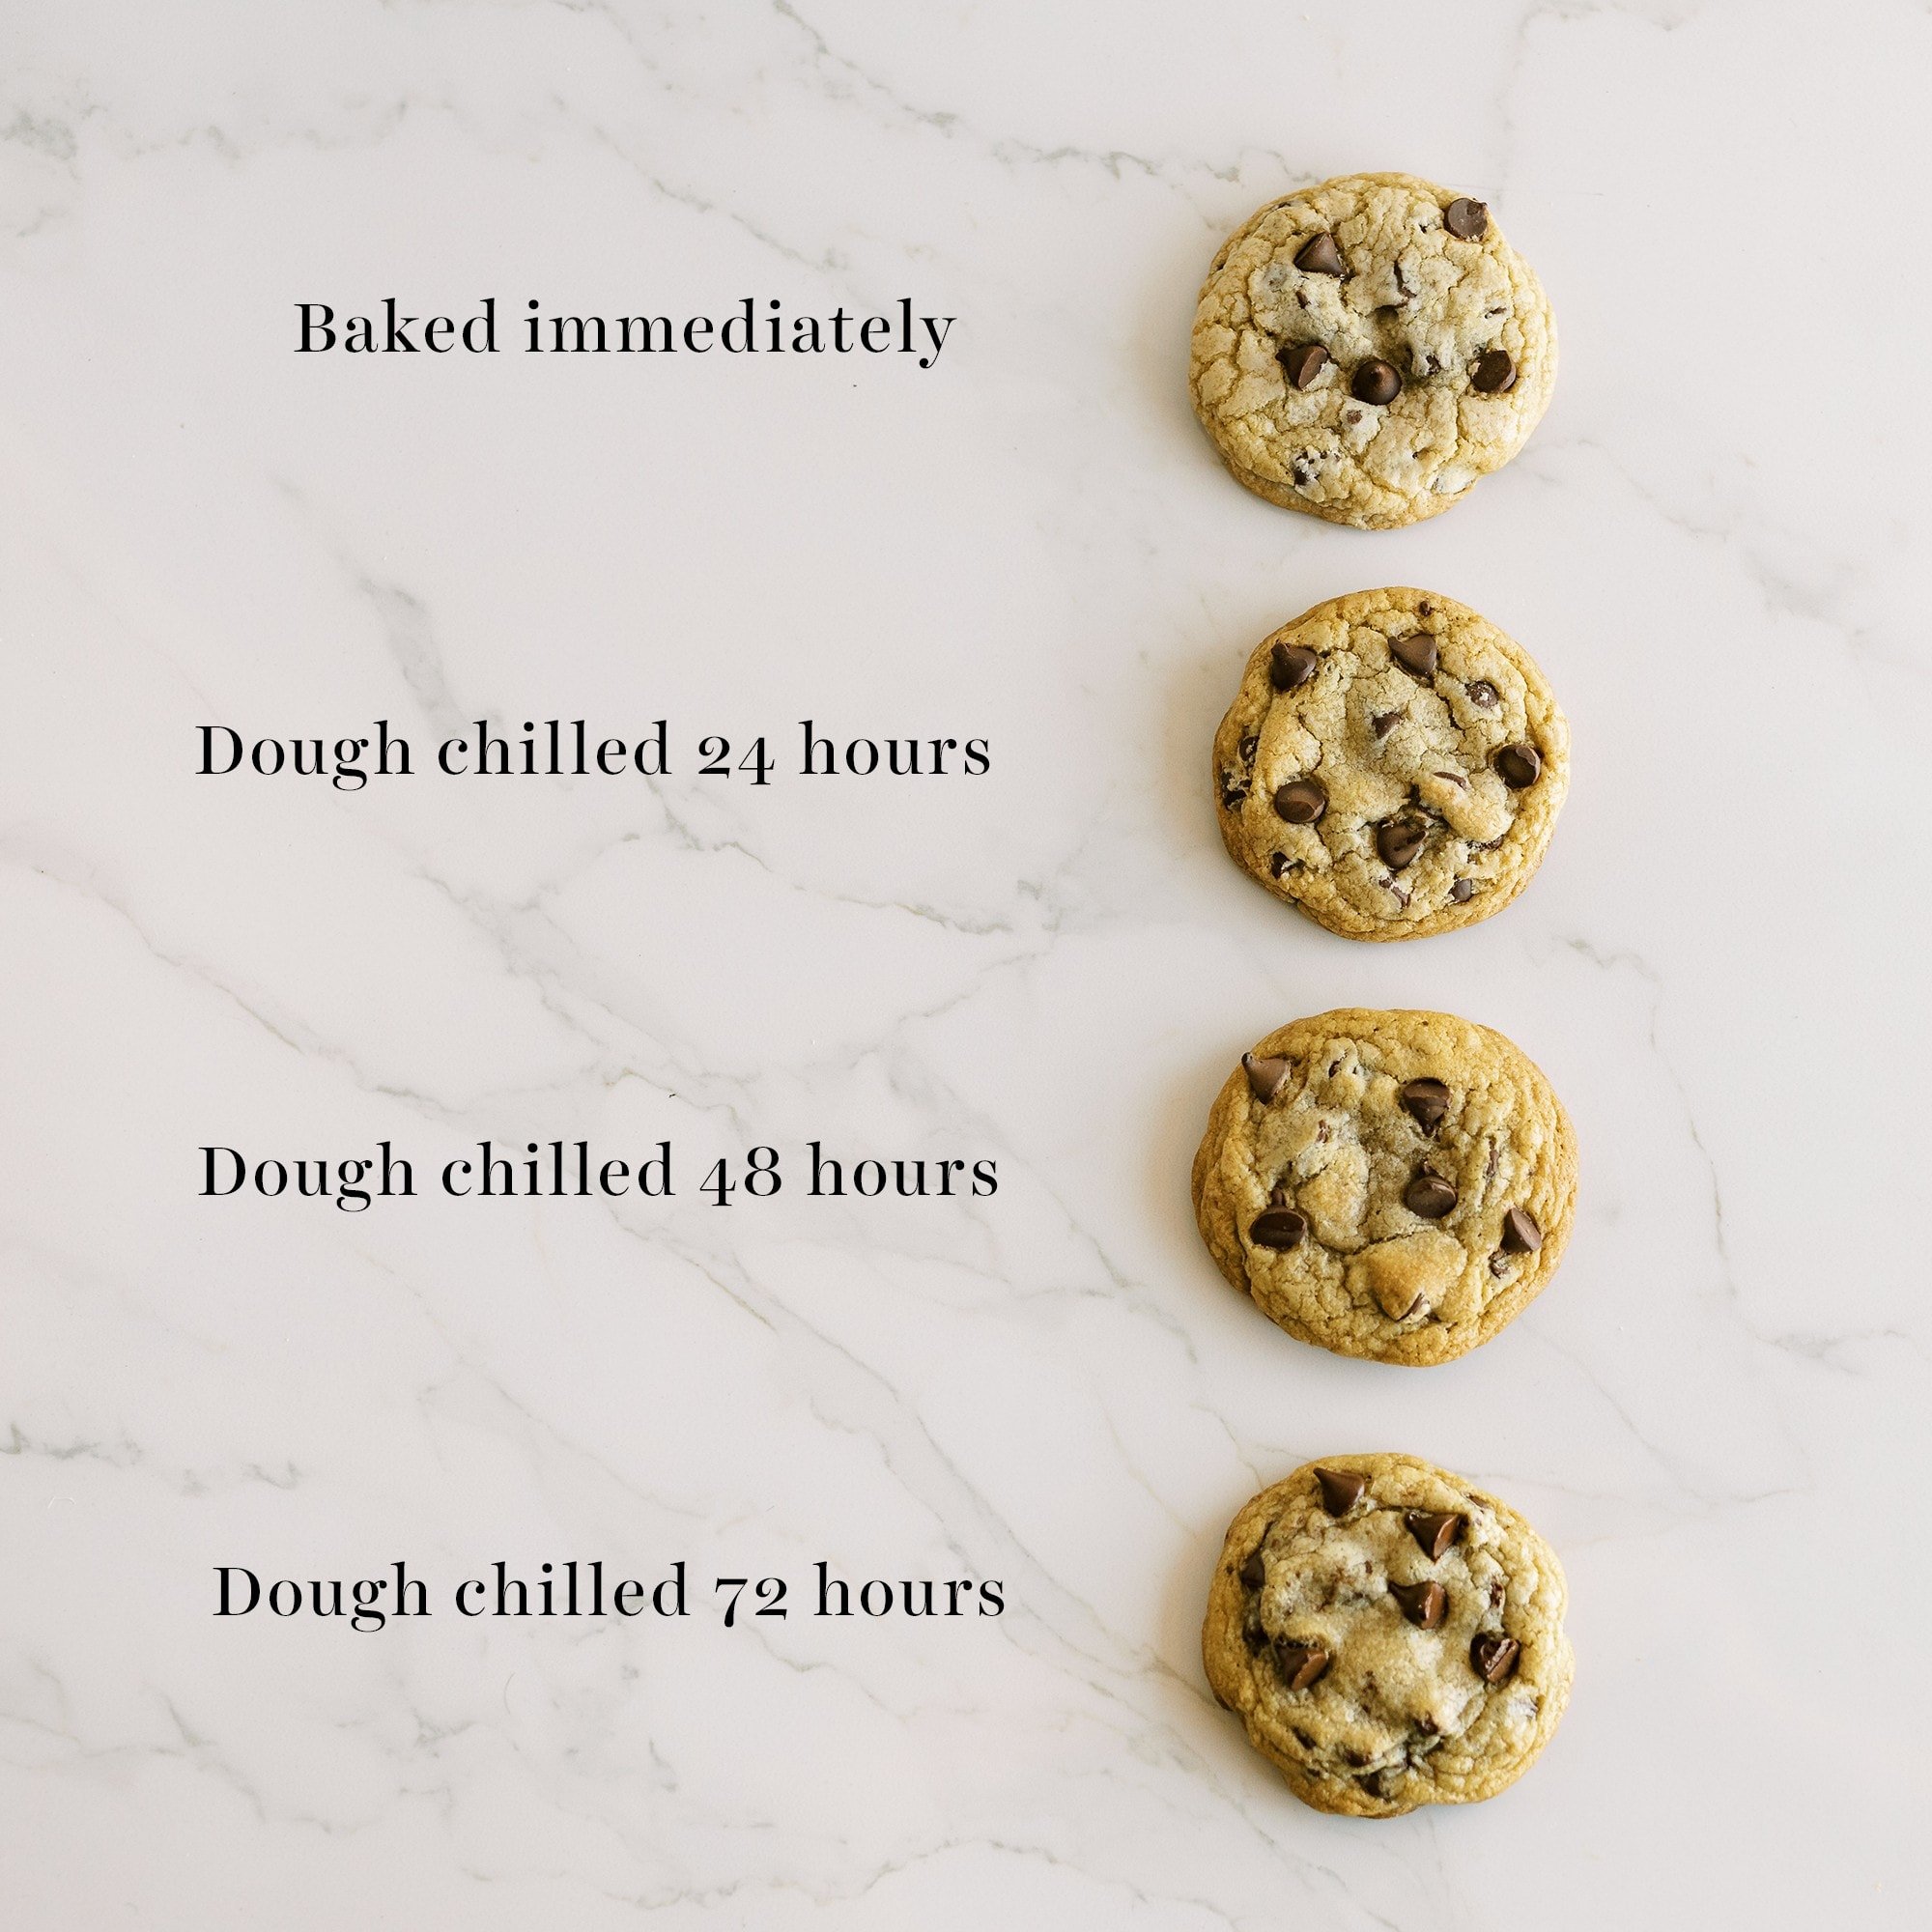 Comparing cookies baked vs chilling dough before baking